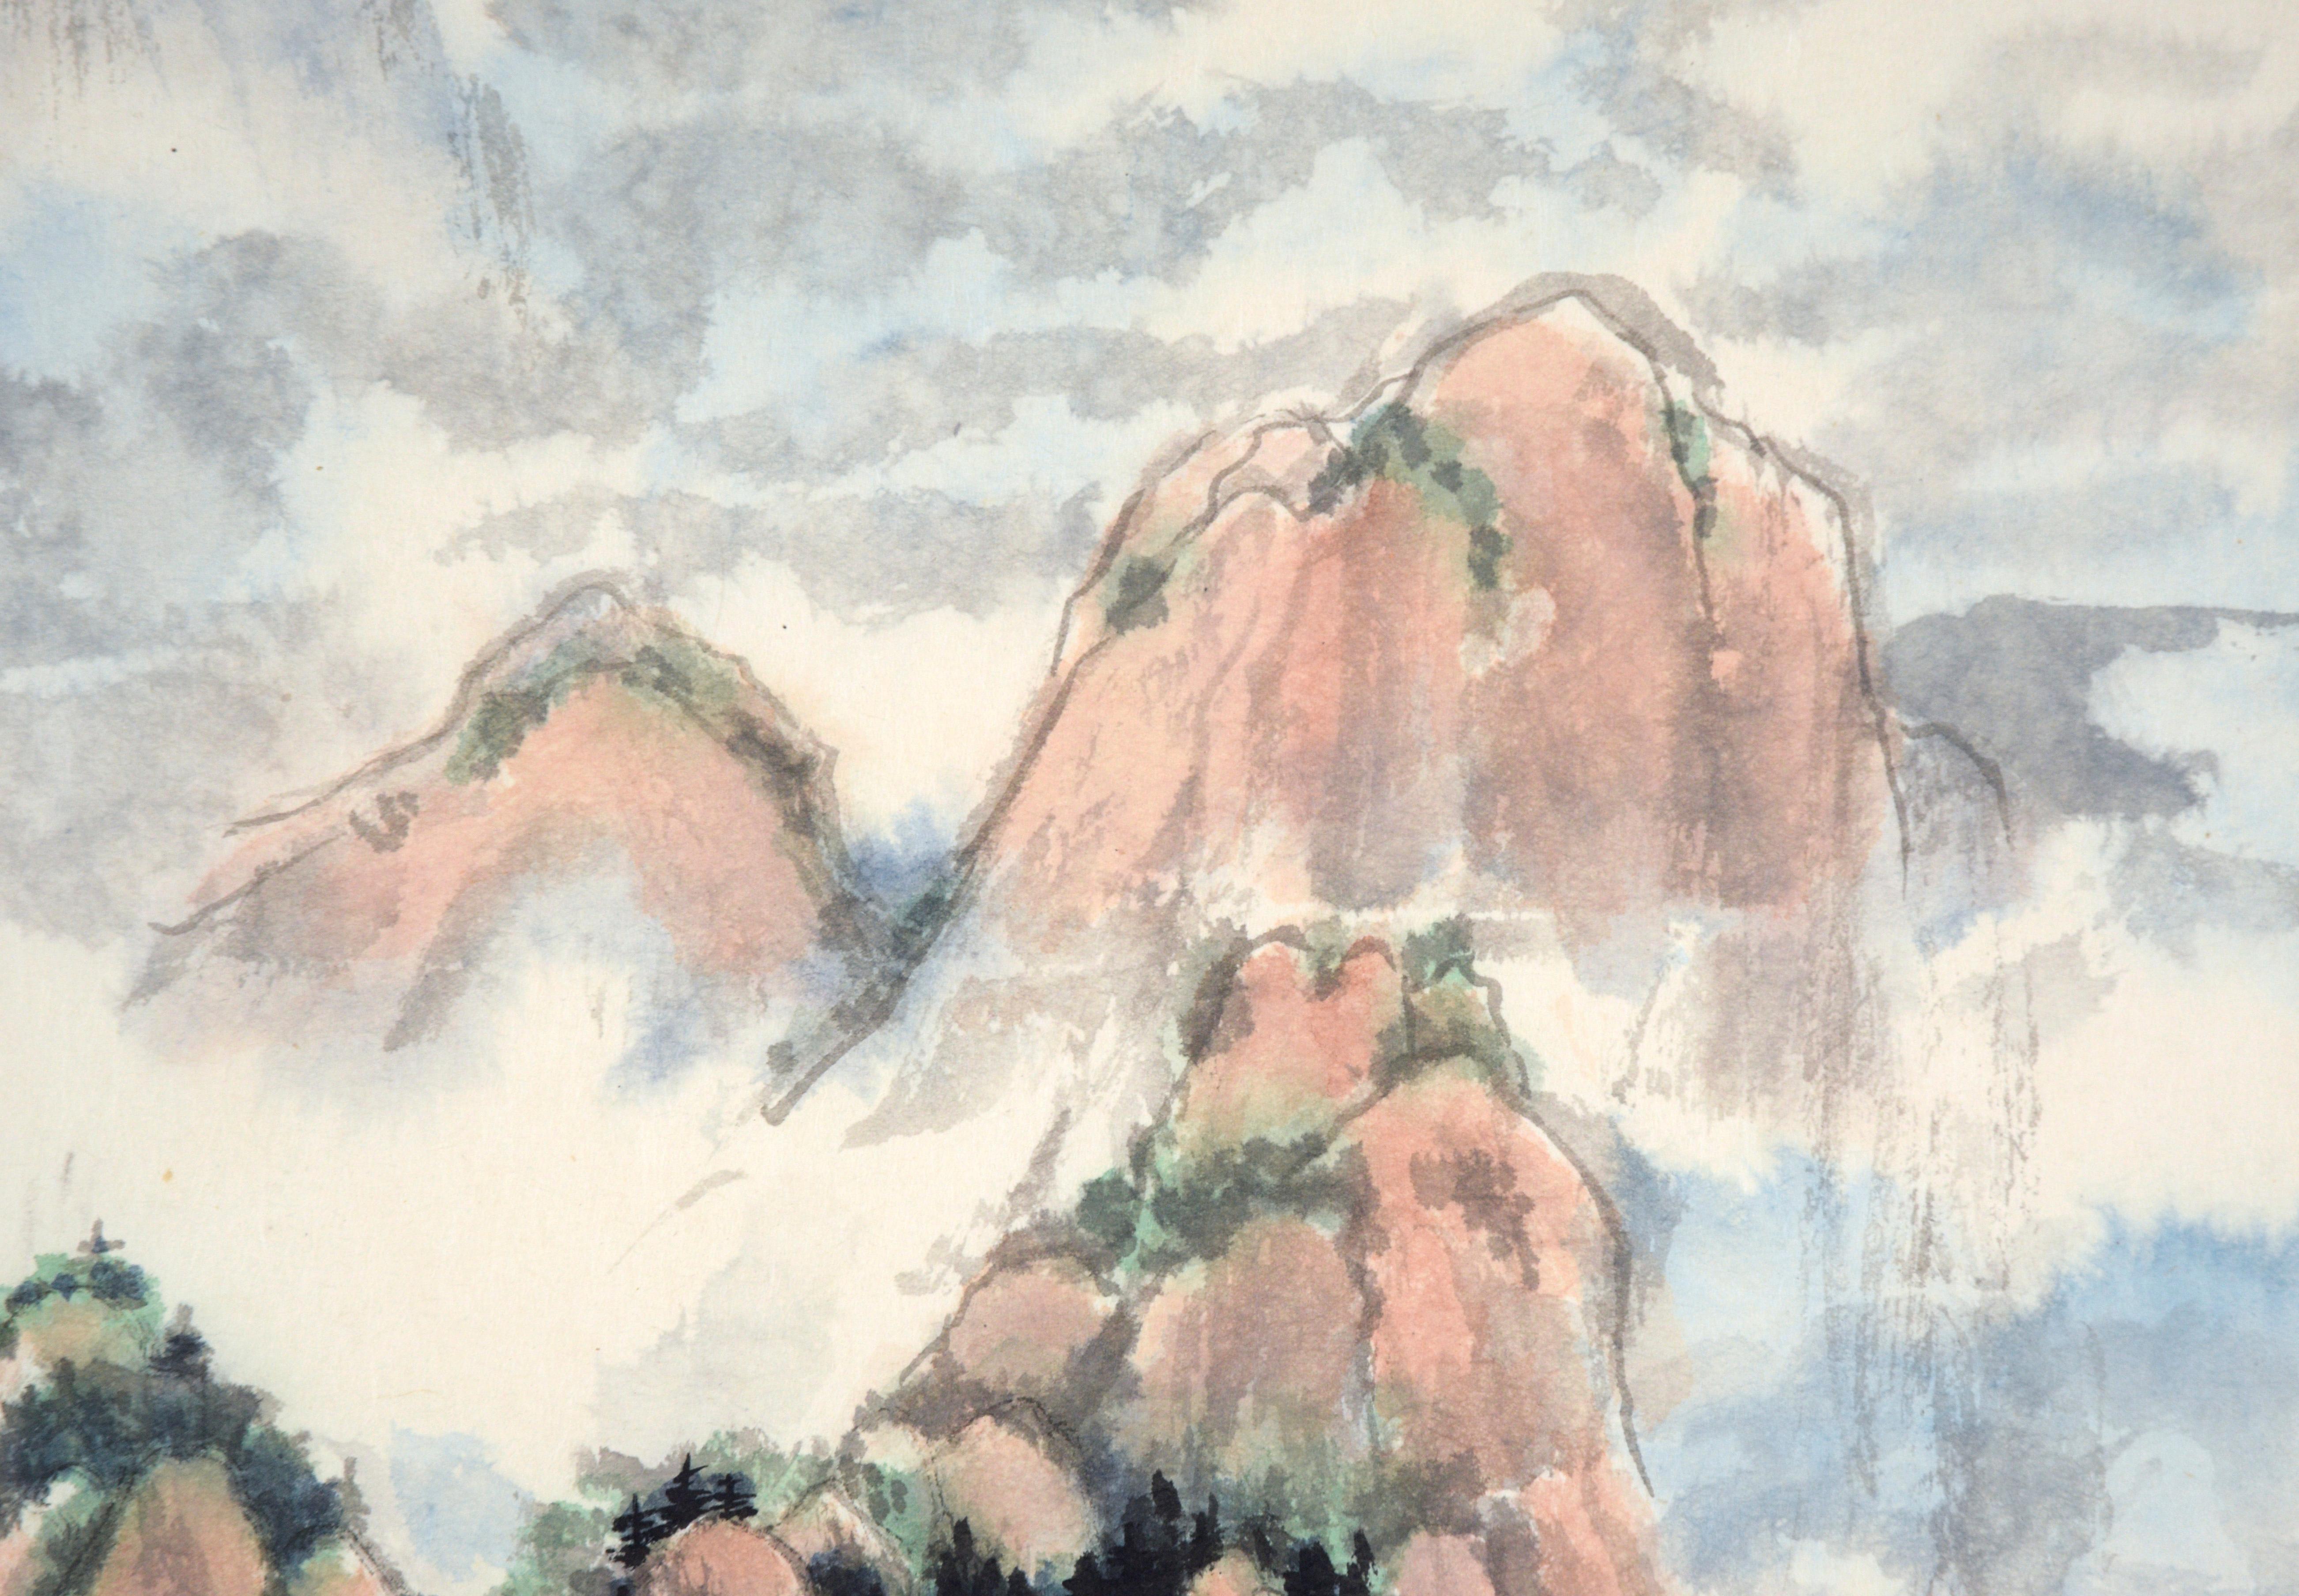 Spring Rain - Vertical Chinese Landscape with Waterfalls and Mountains

Idyllic landscape with a massive waterfall by an unknown artist (20th Century). The scene depicted is a series of mountains, receding into the distance. In the mid ground, there